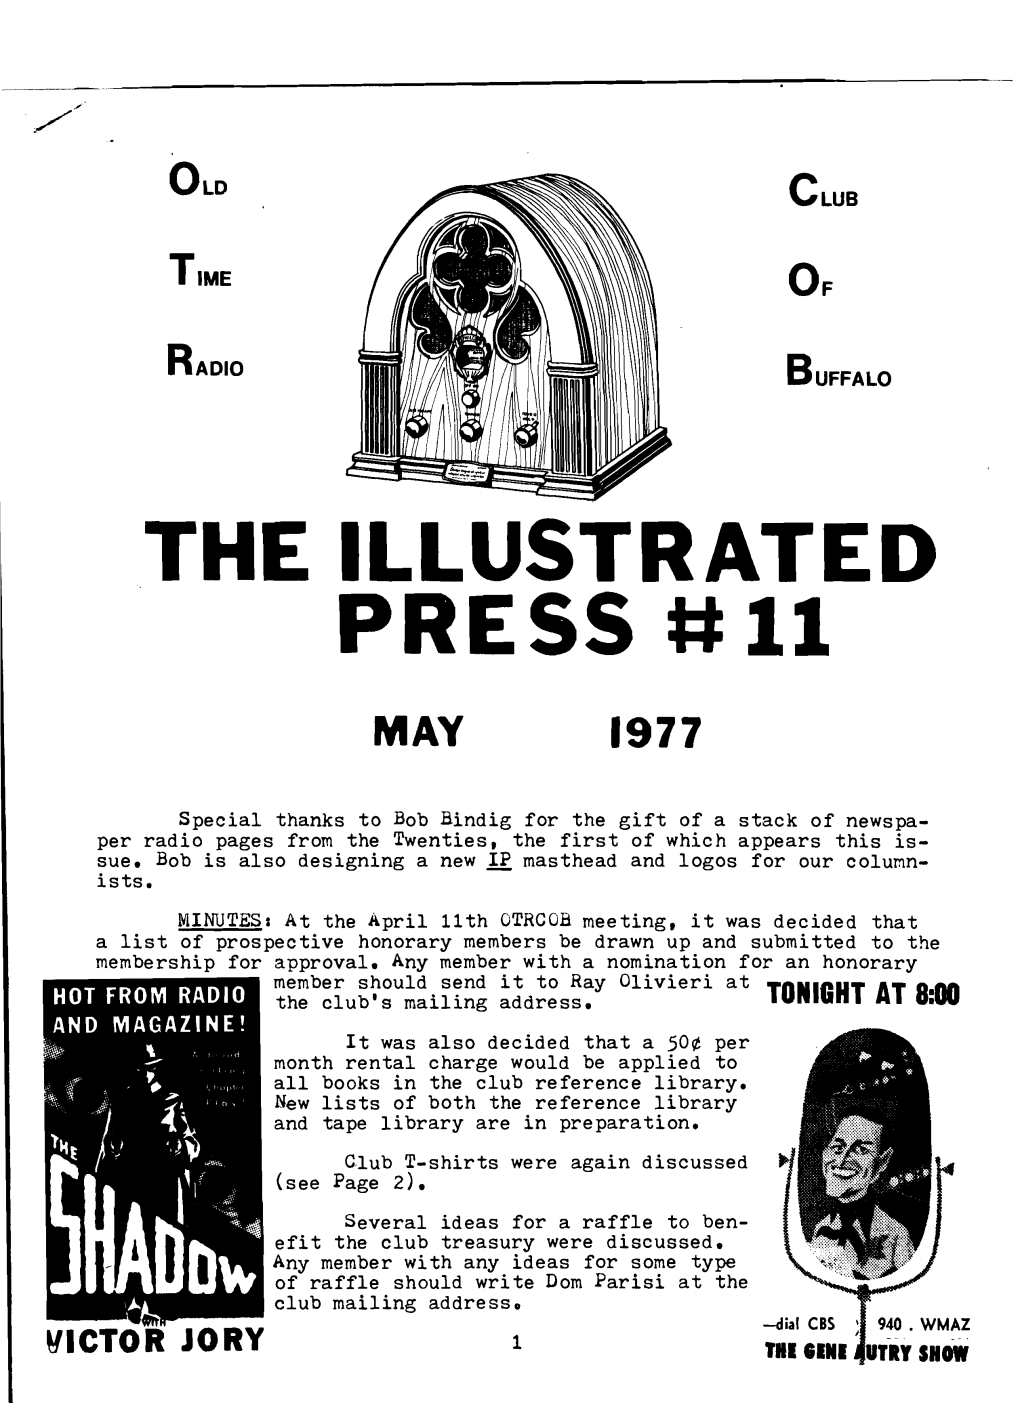 The Illustrated Press ** 11 May 1977